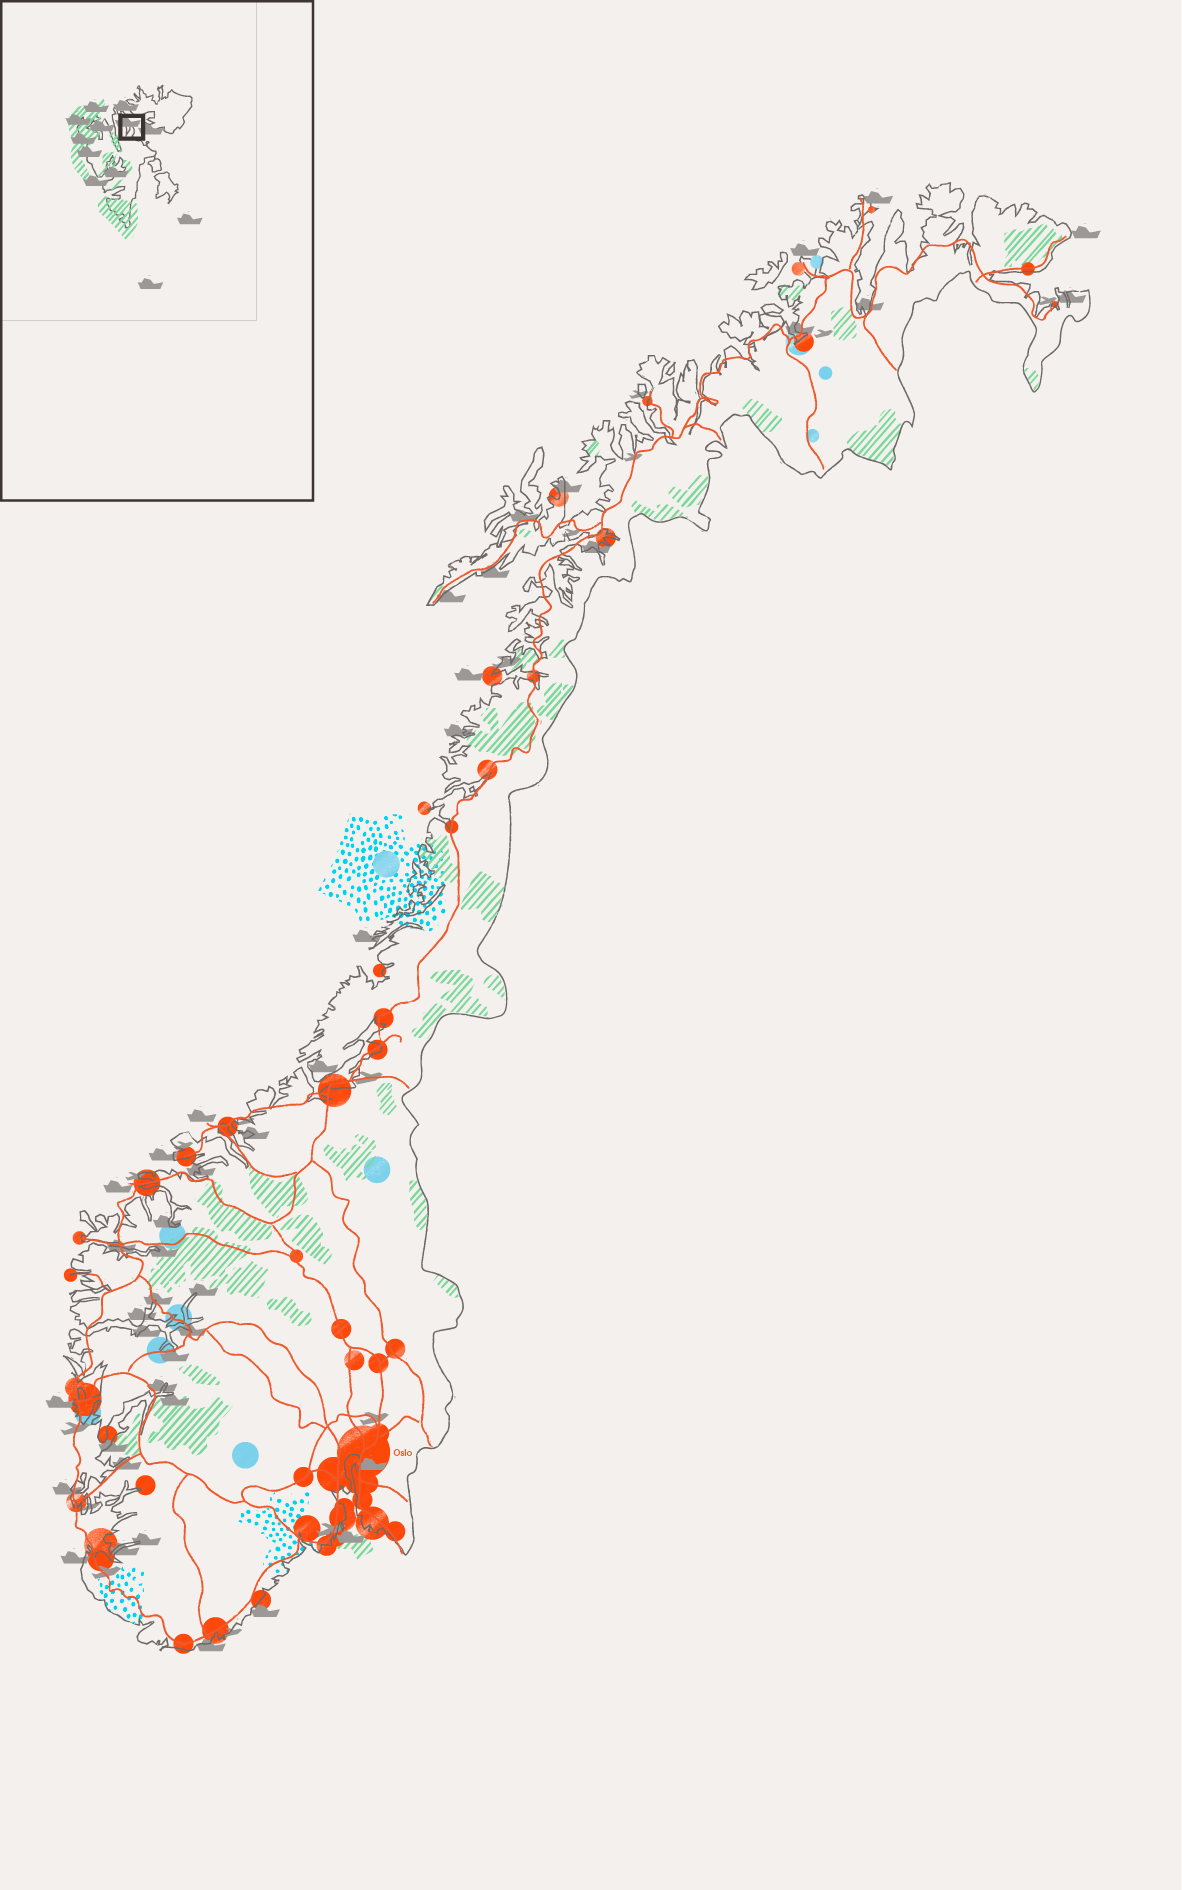 Map of Norway, illustrated.